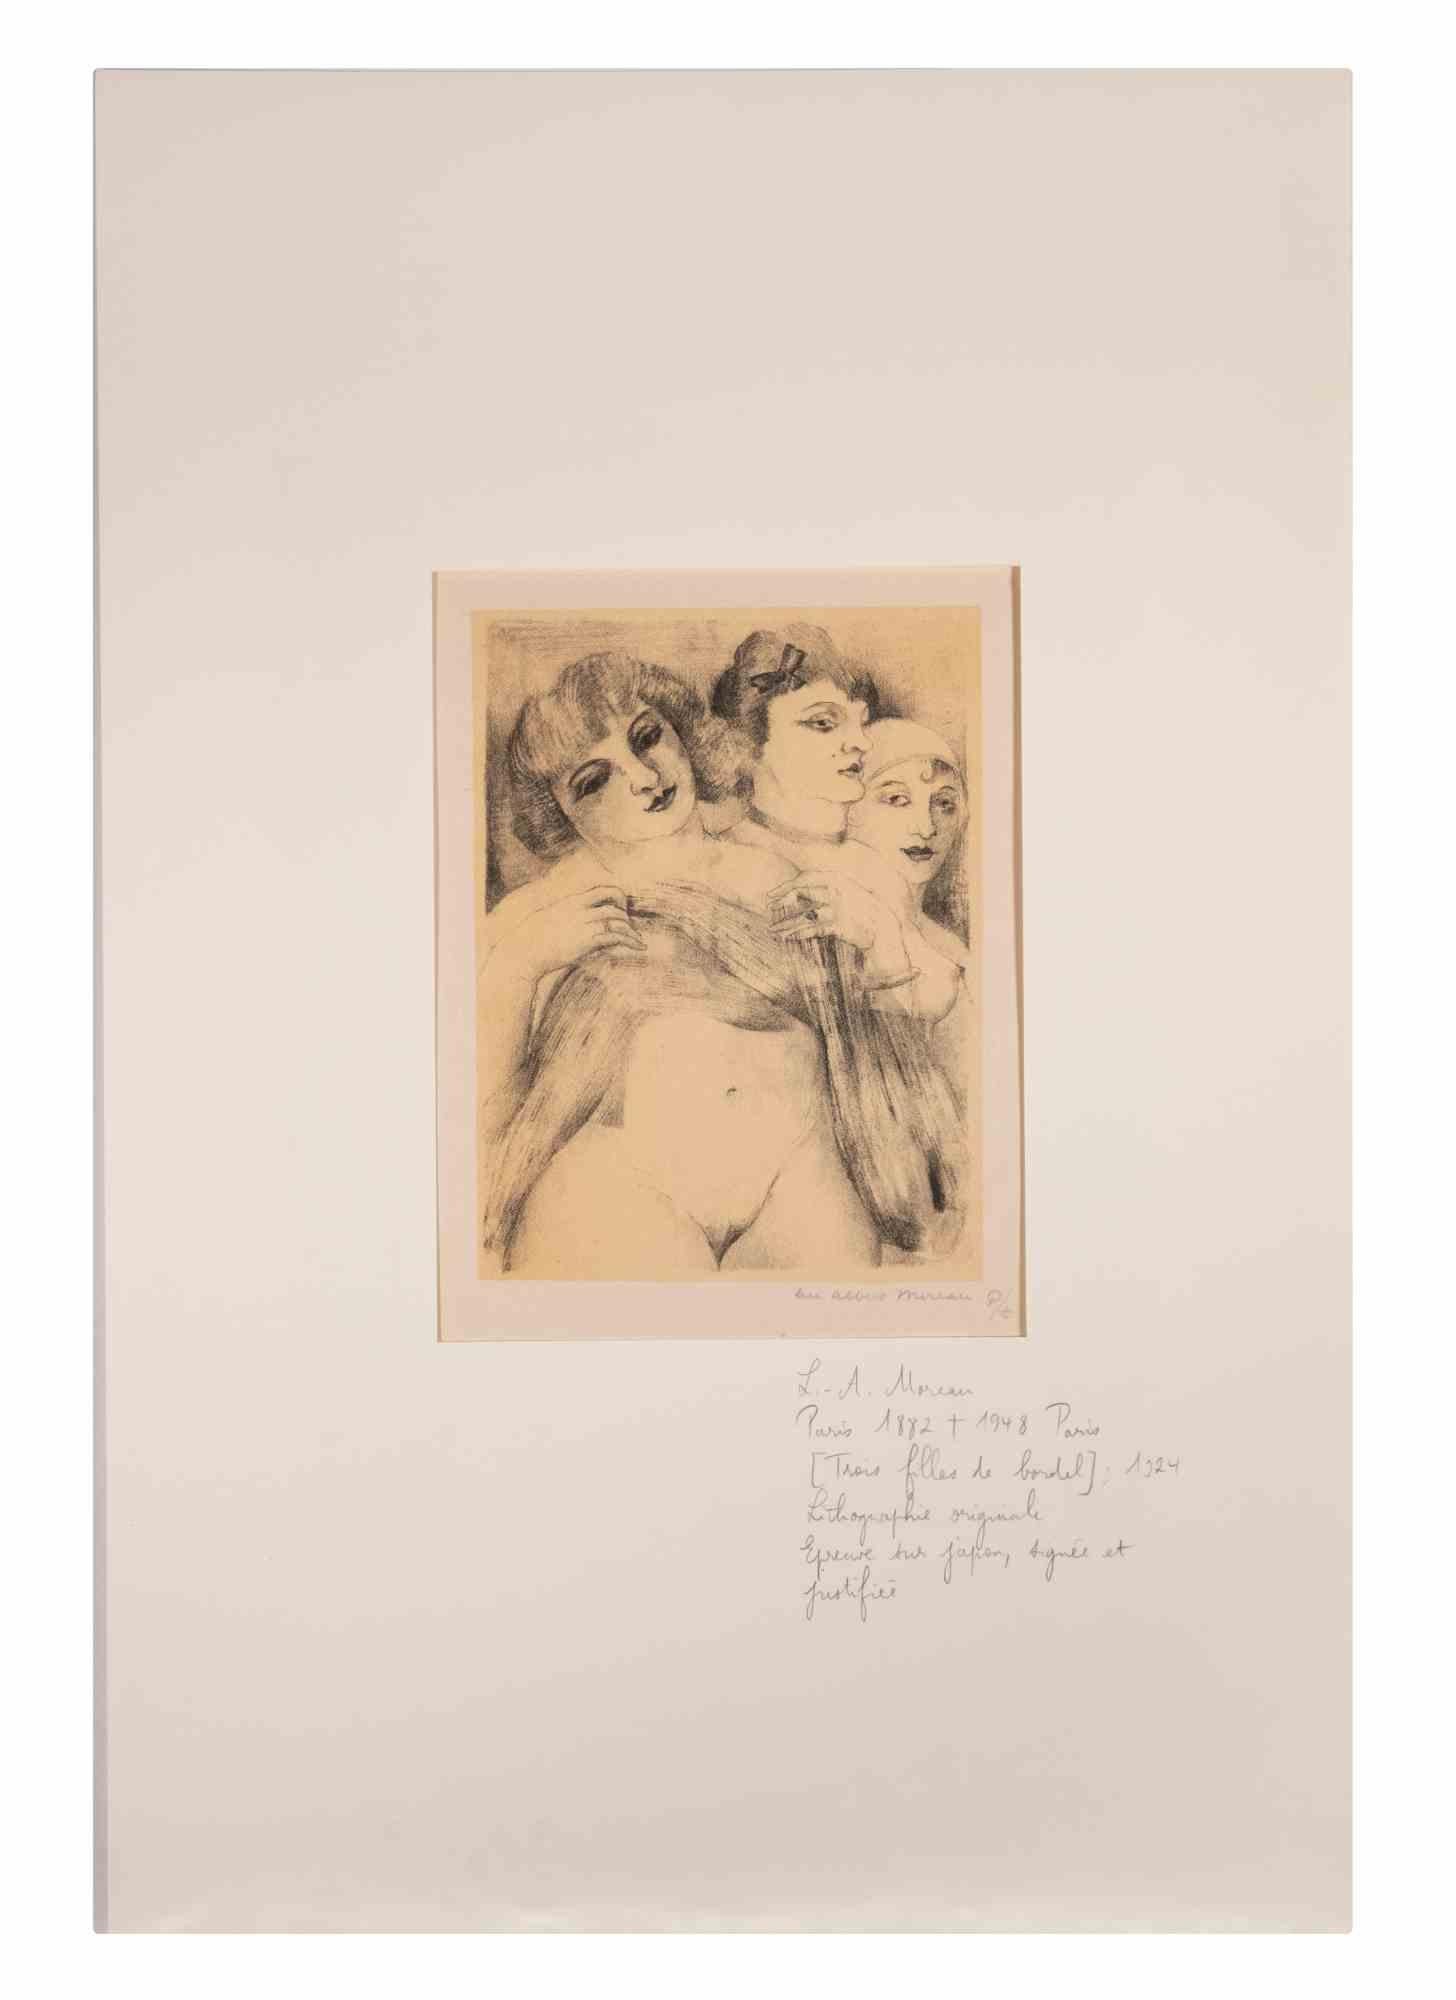 Three Whorehouses is a Lithograph on ivory-colored paper realized by Luc Albert Moreau.

The artwork is in good condition, included a white cardboard passpartout (48.5x32.5 cm).

Hand-signature on the lower right corner.

Luc-Albert Moreau